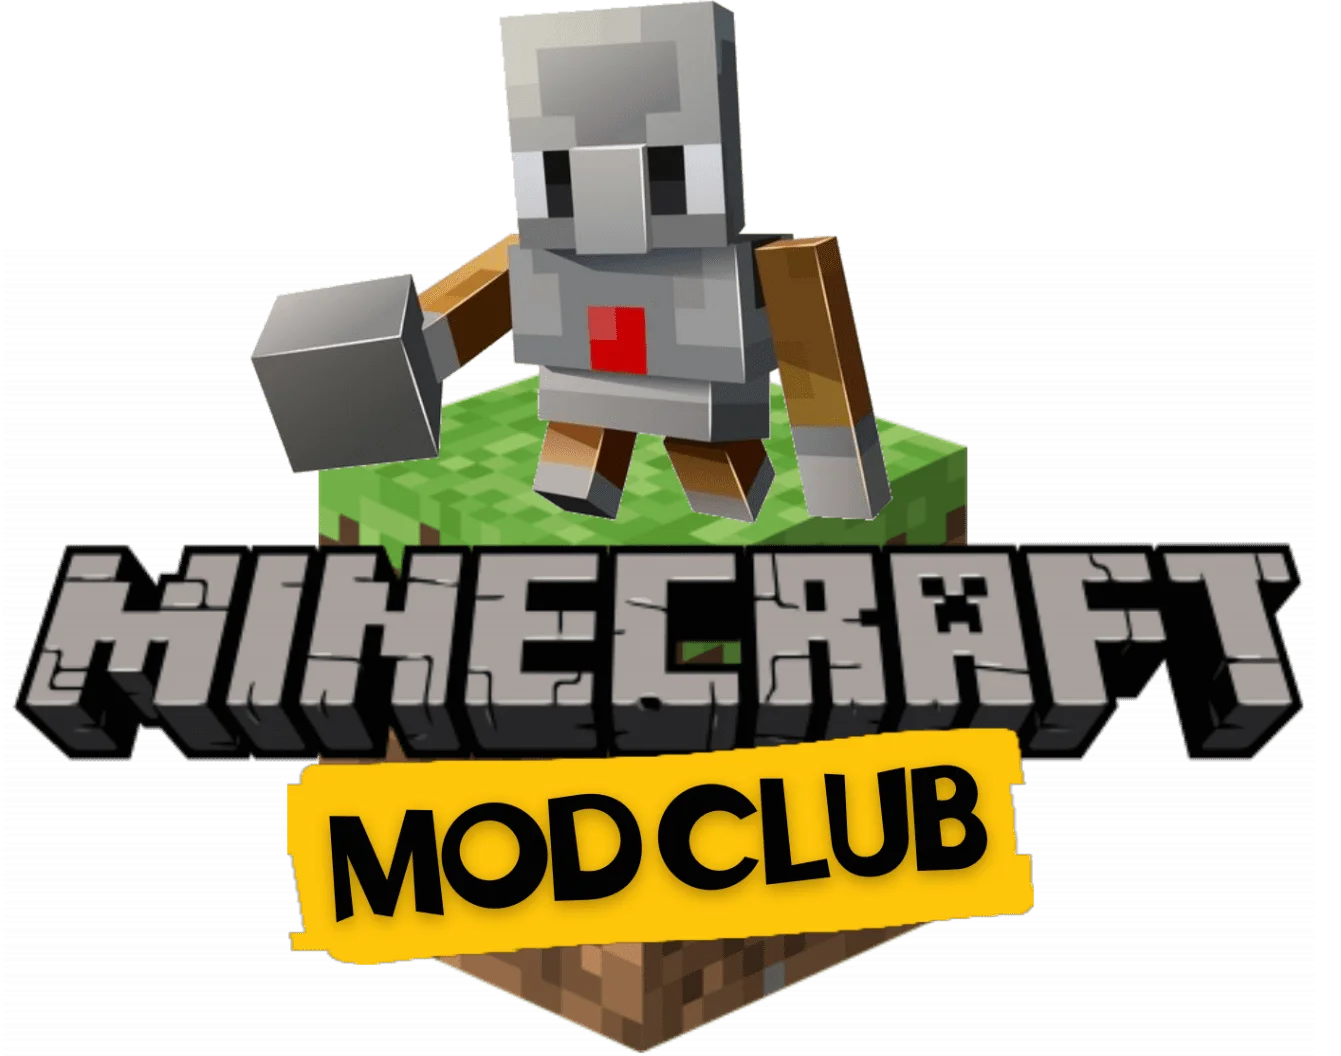 Minecraft Mod Club: What's it all about?